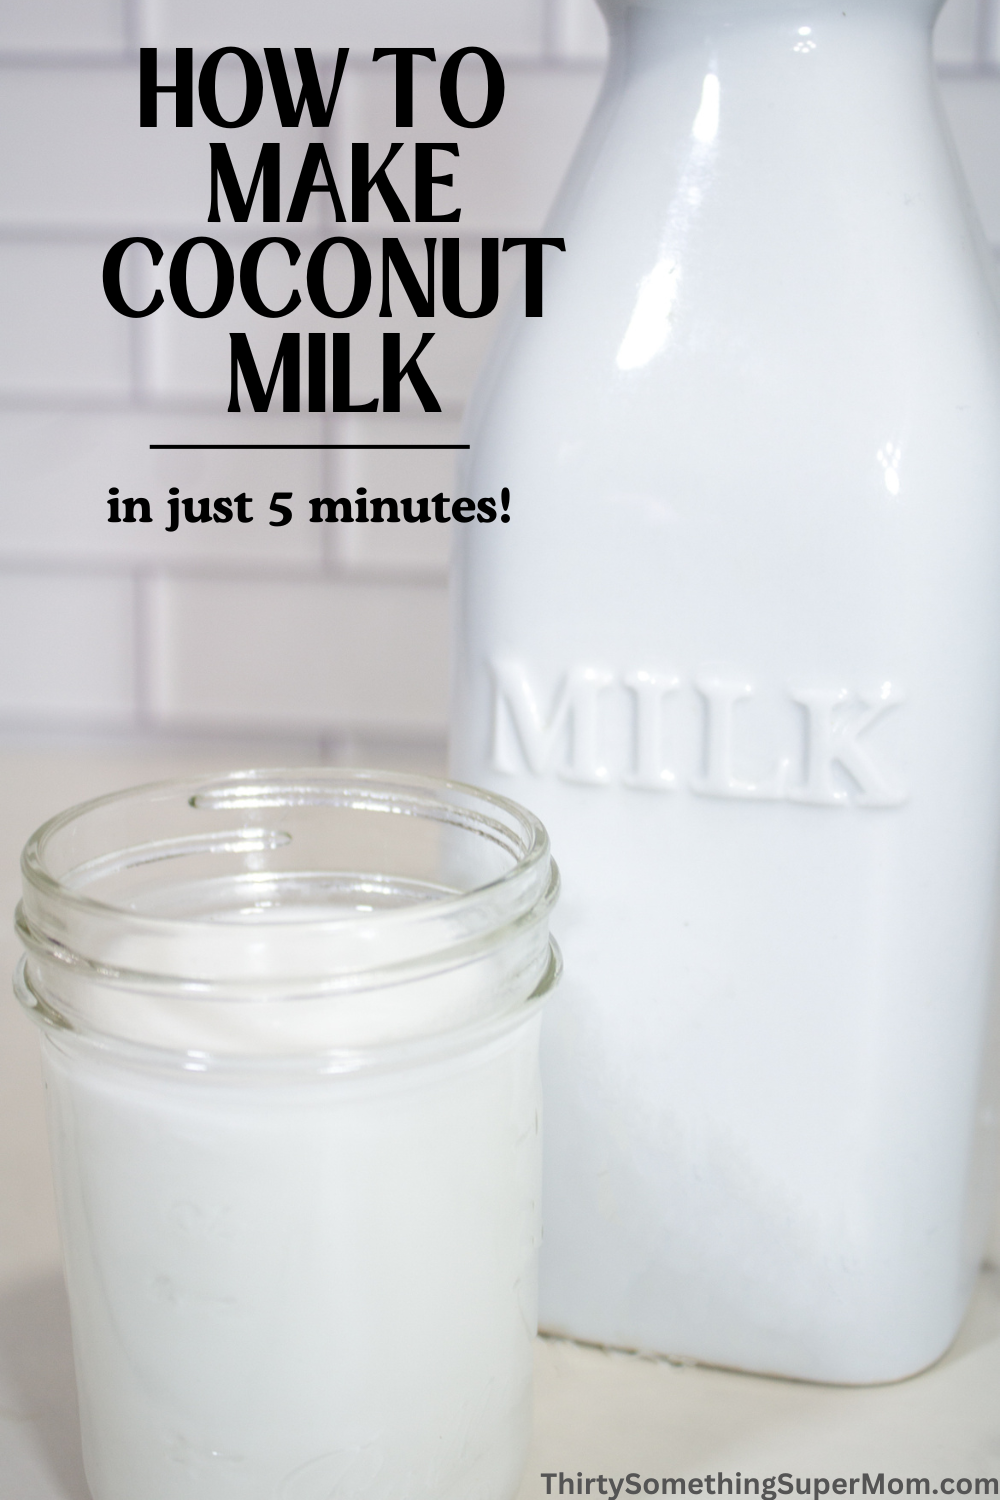 How to Make Coconut Milk infographic. 